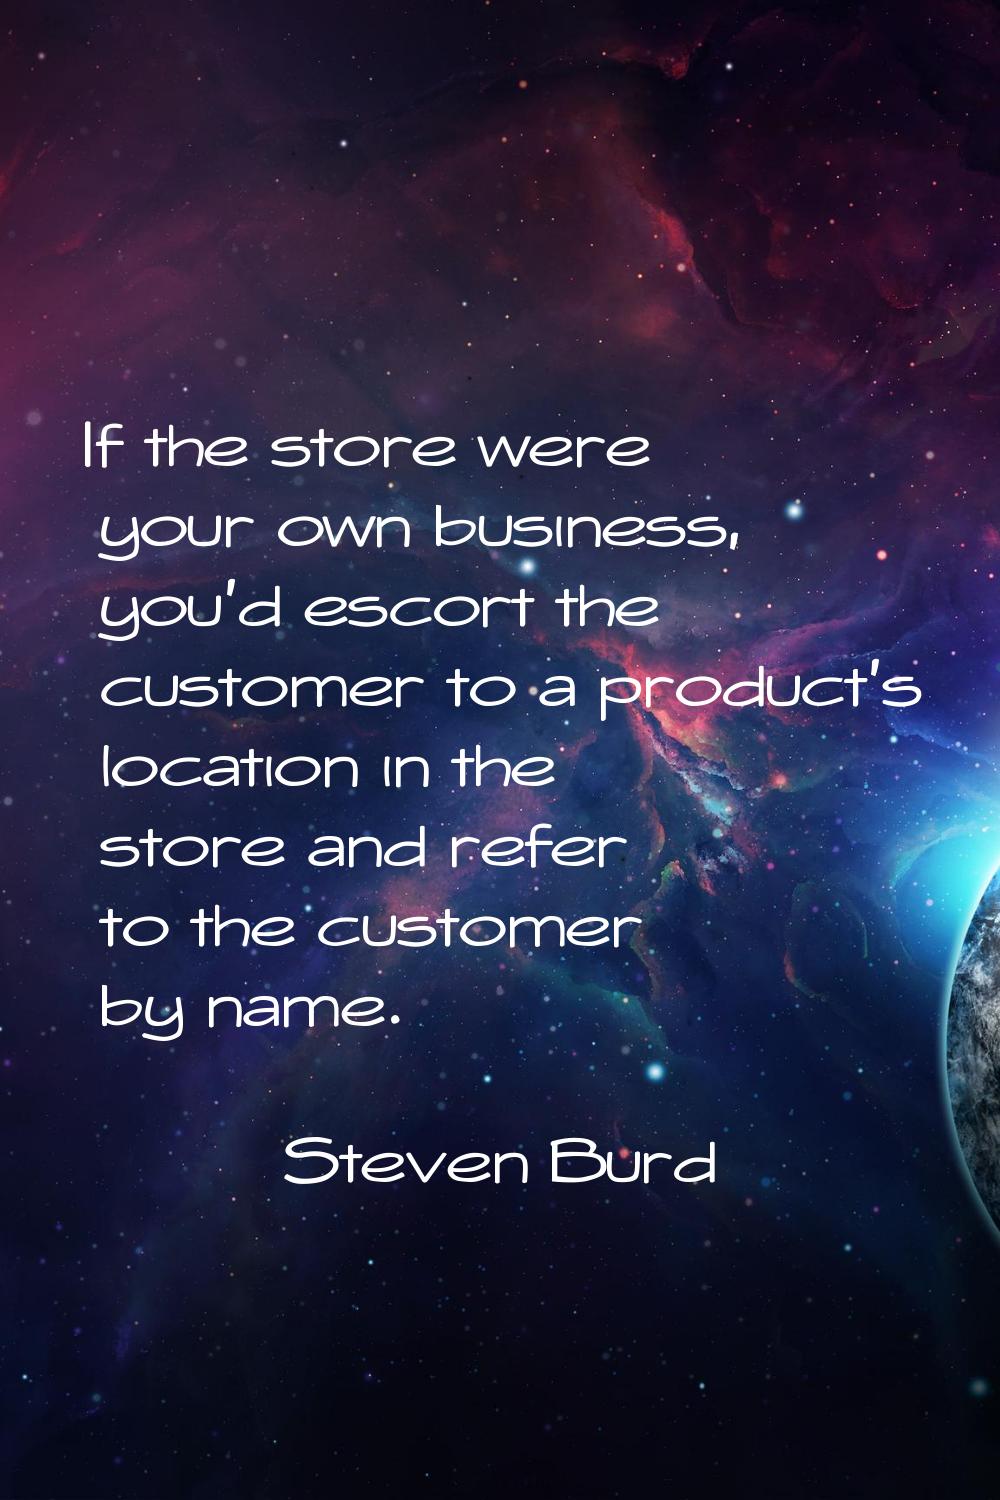 If the store were your own business, you'd escort the customer to a product's location in the store